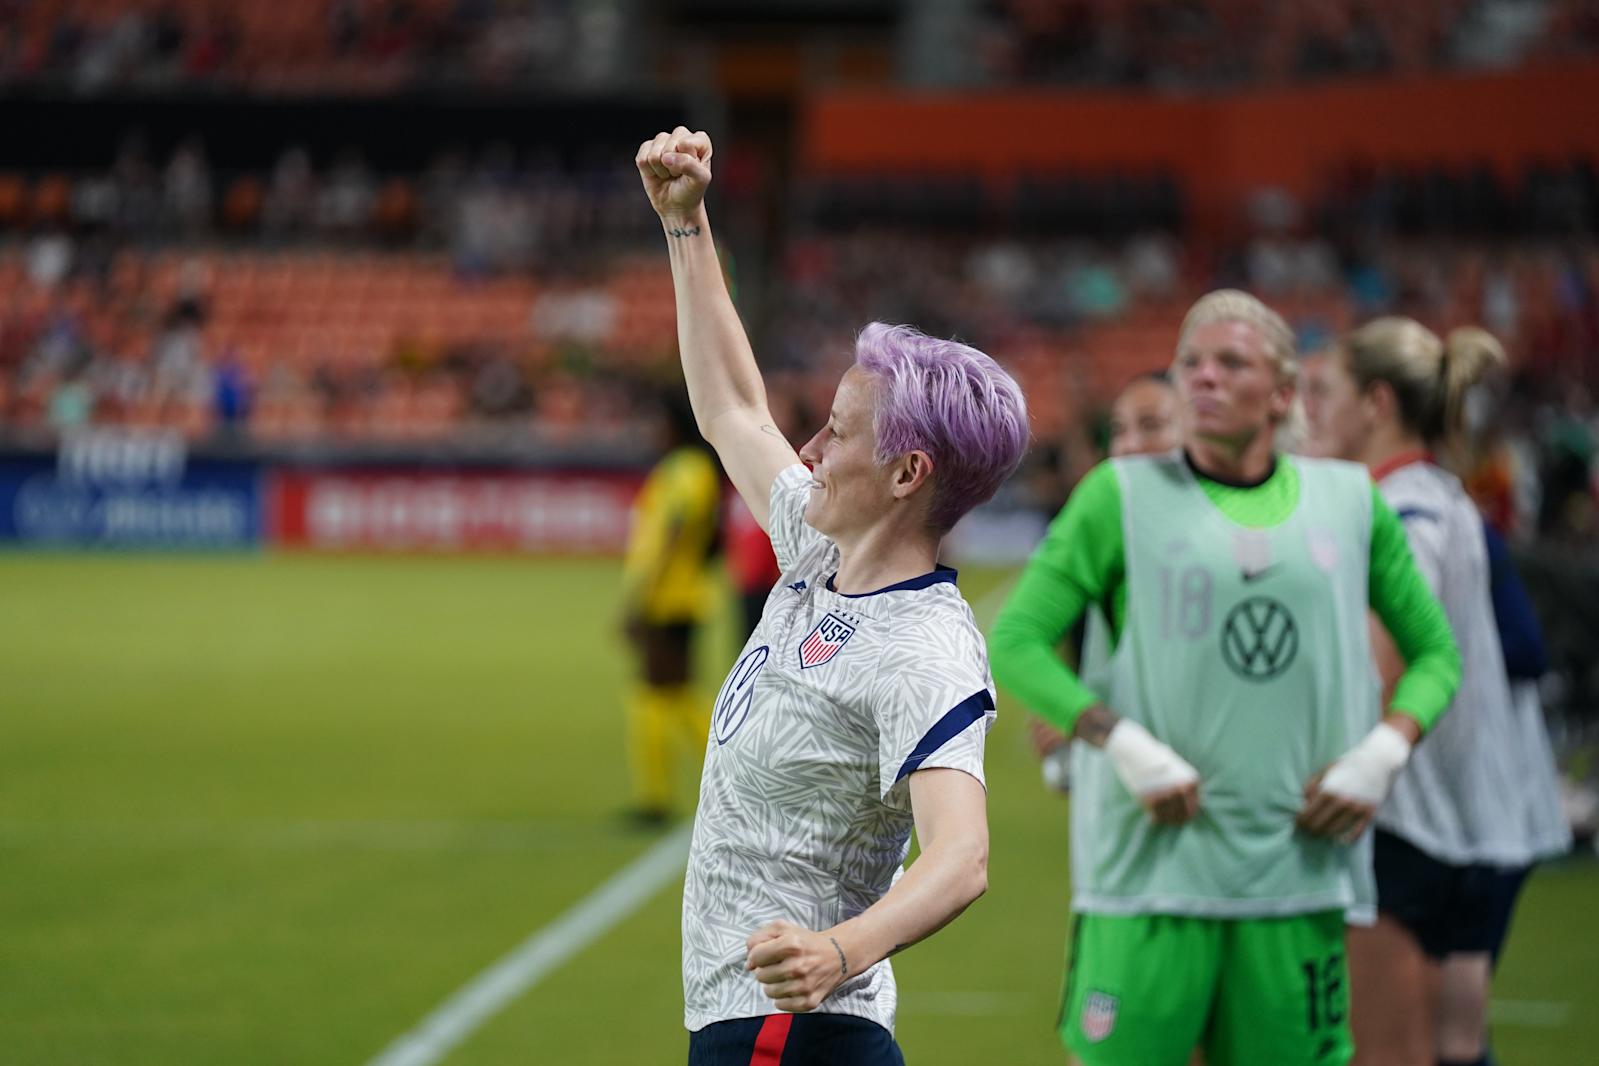 hbo-max-releases-‘lfg’-documentary-trailer-on-uswnt-equal-pay-fight